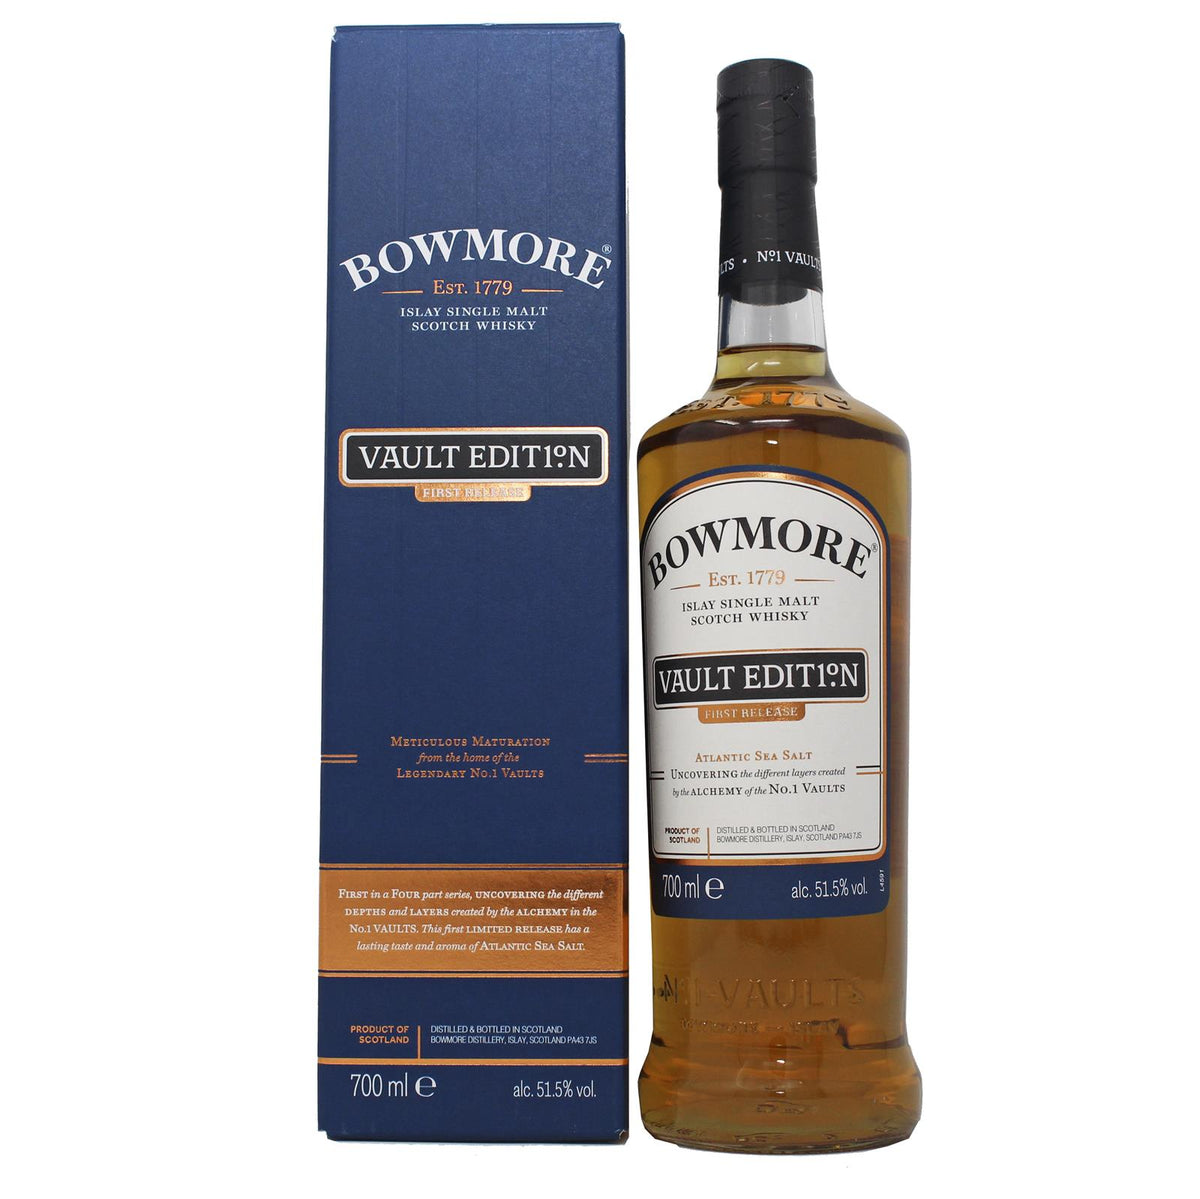 Bowmore Vault Edition First Release Islay Single Malt Scotch Whisky 0,7L